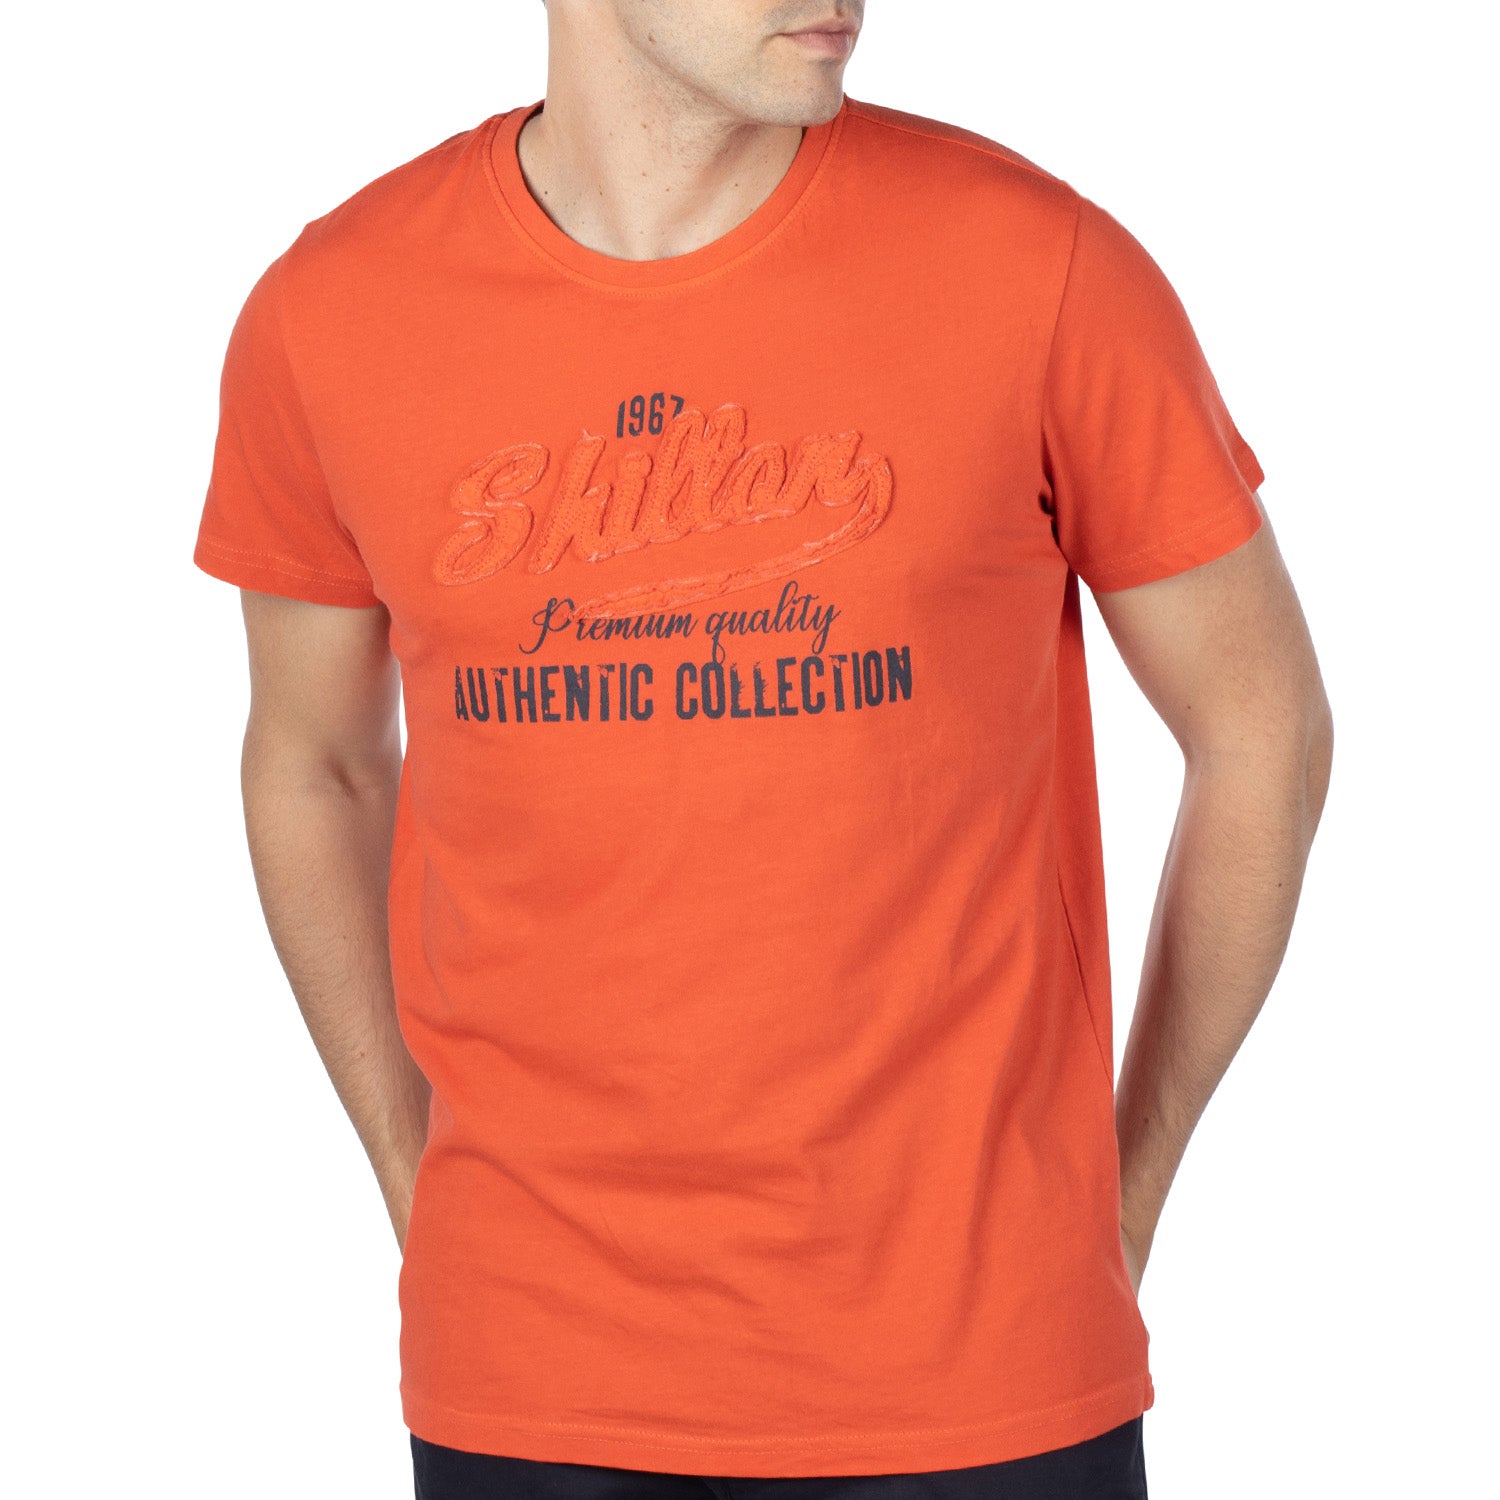 T-shirt authentic collection